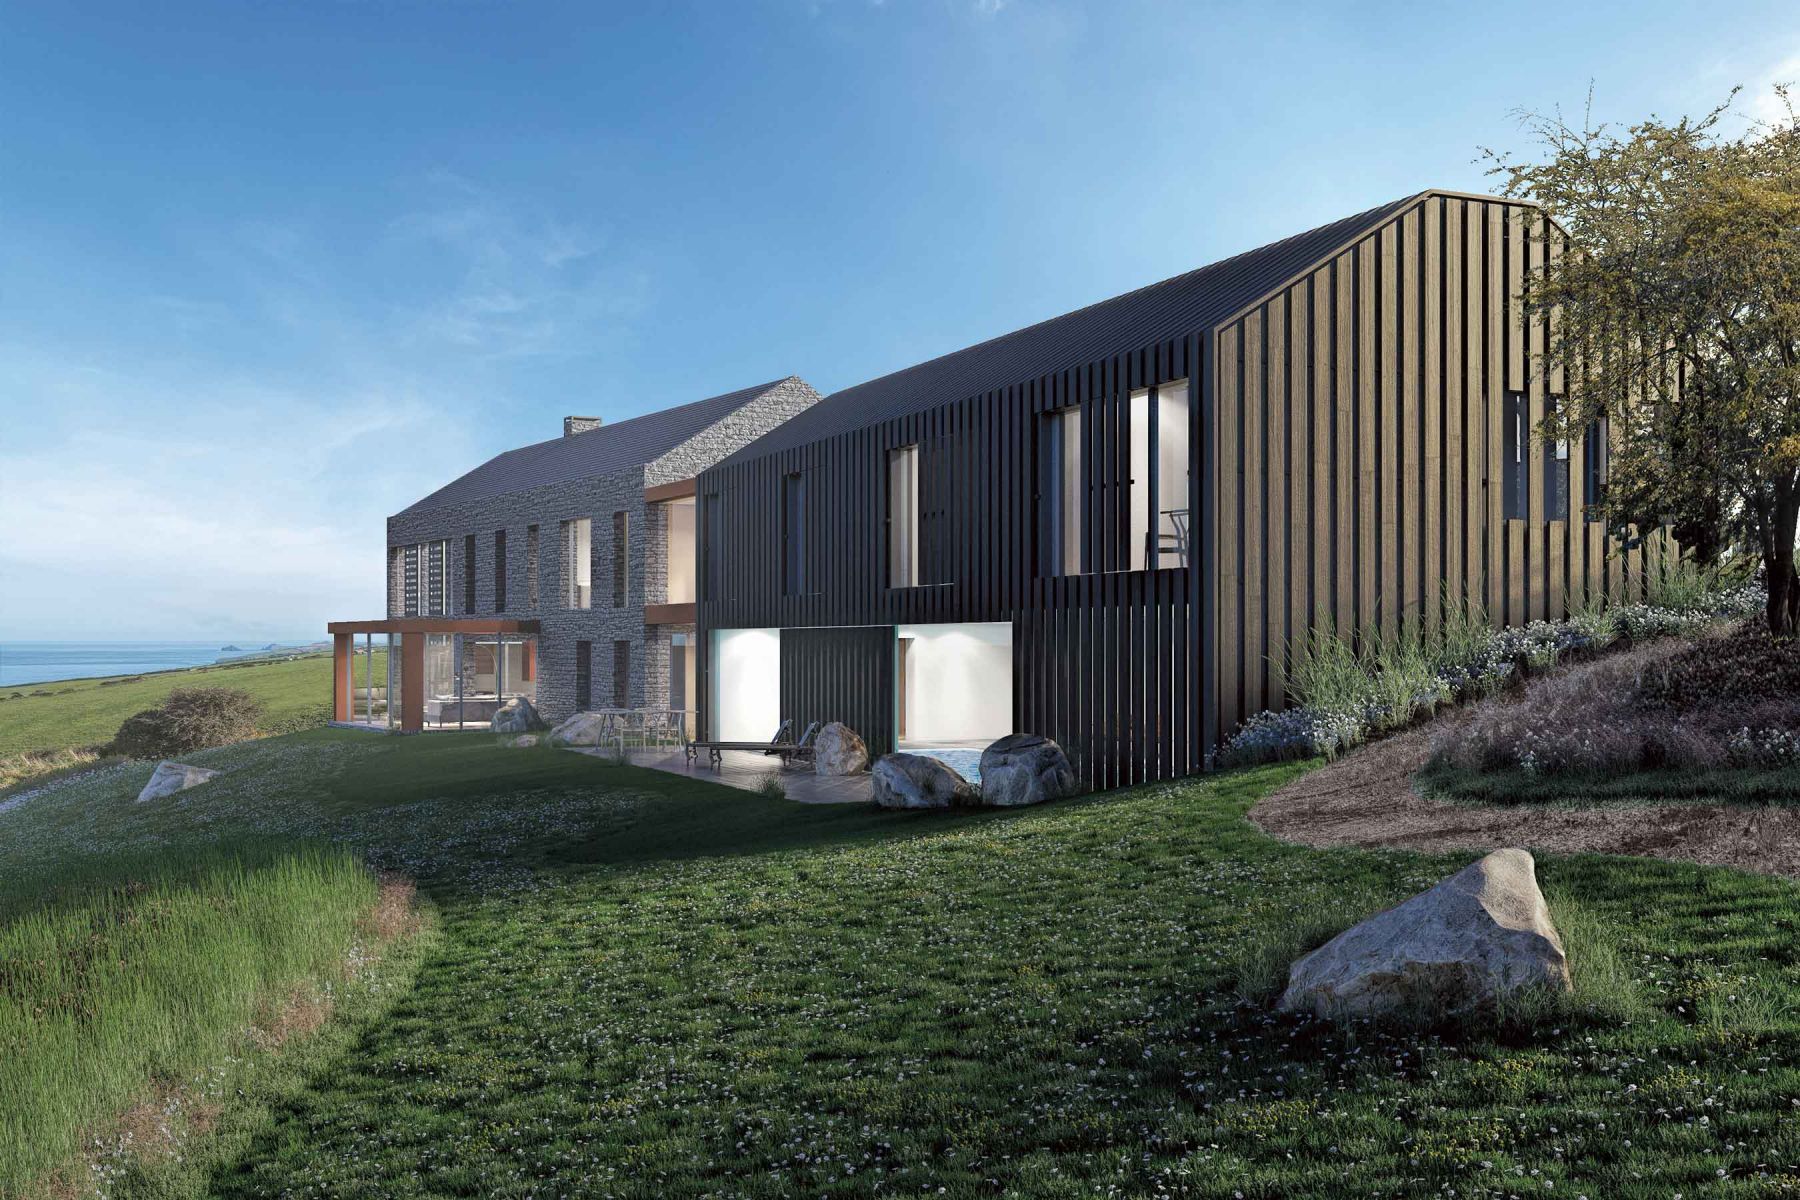 Port Issac new home. Designed by Woodford Architecture